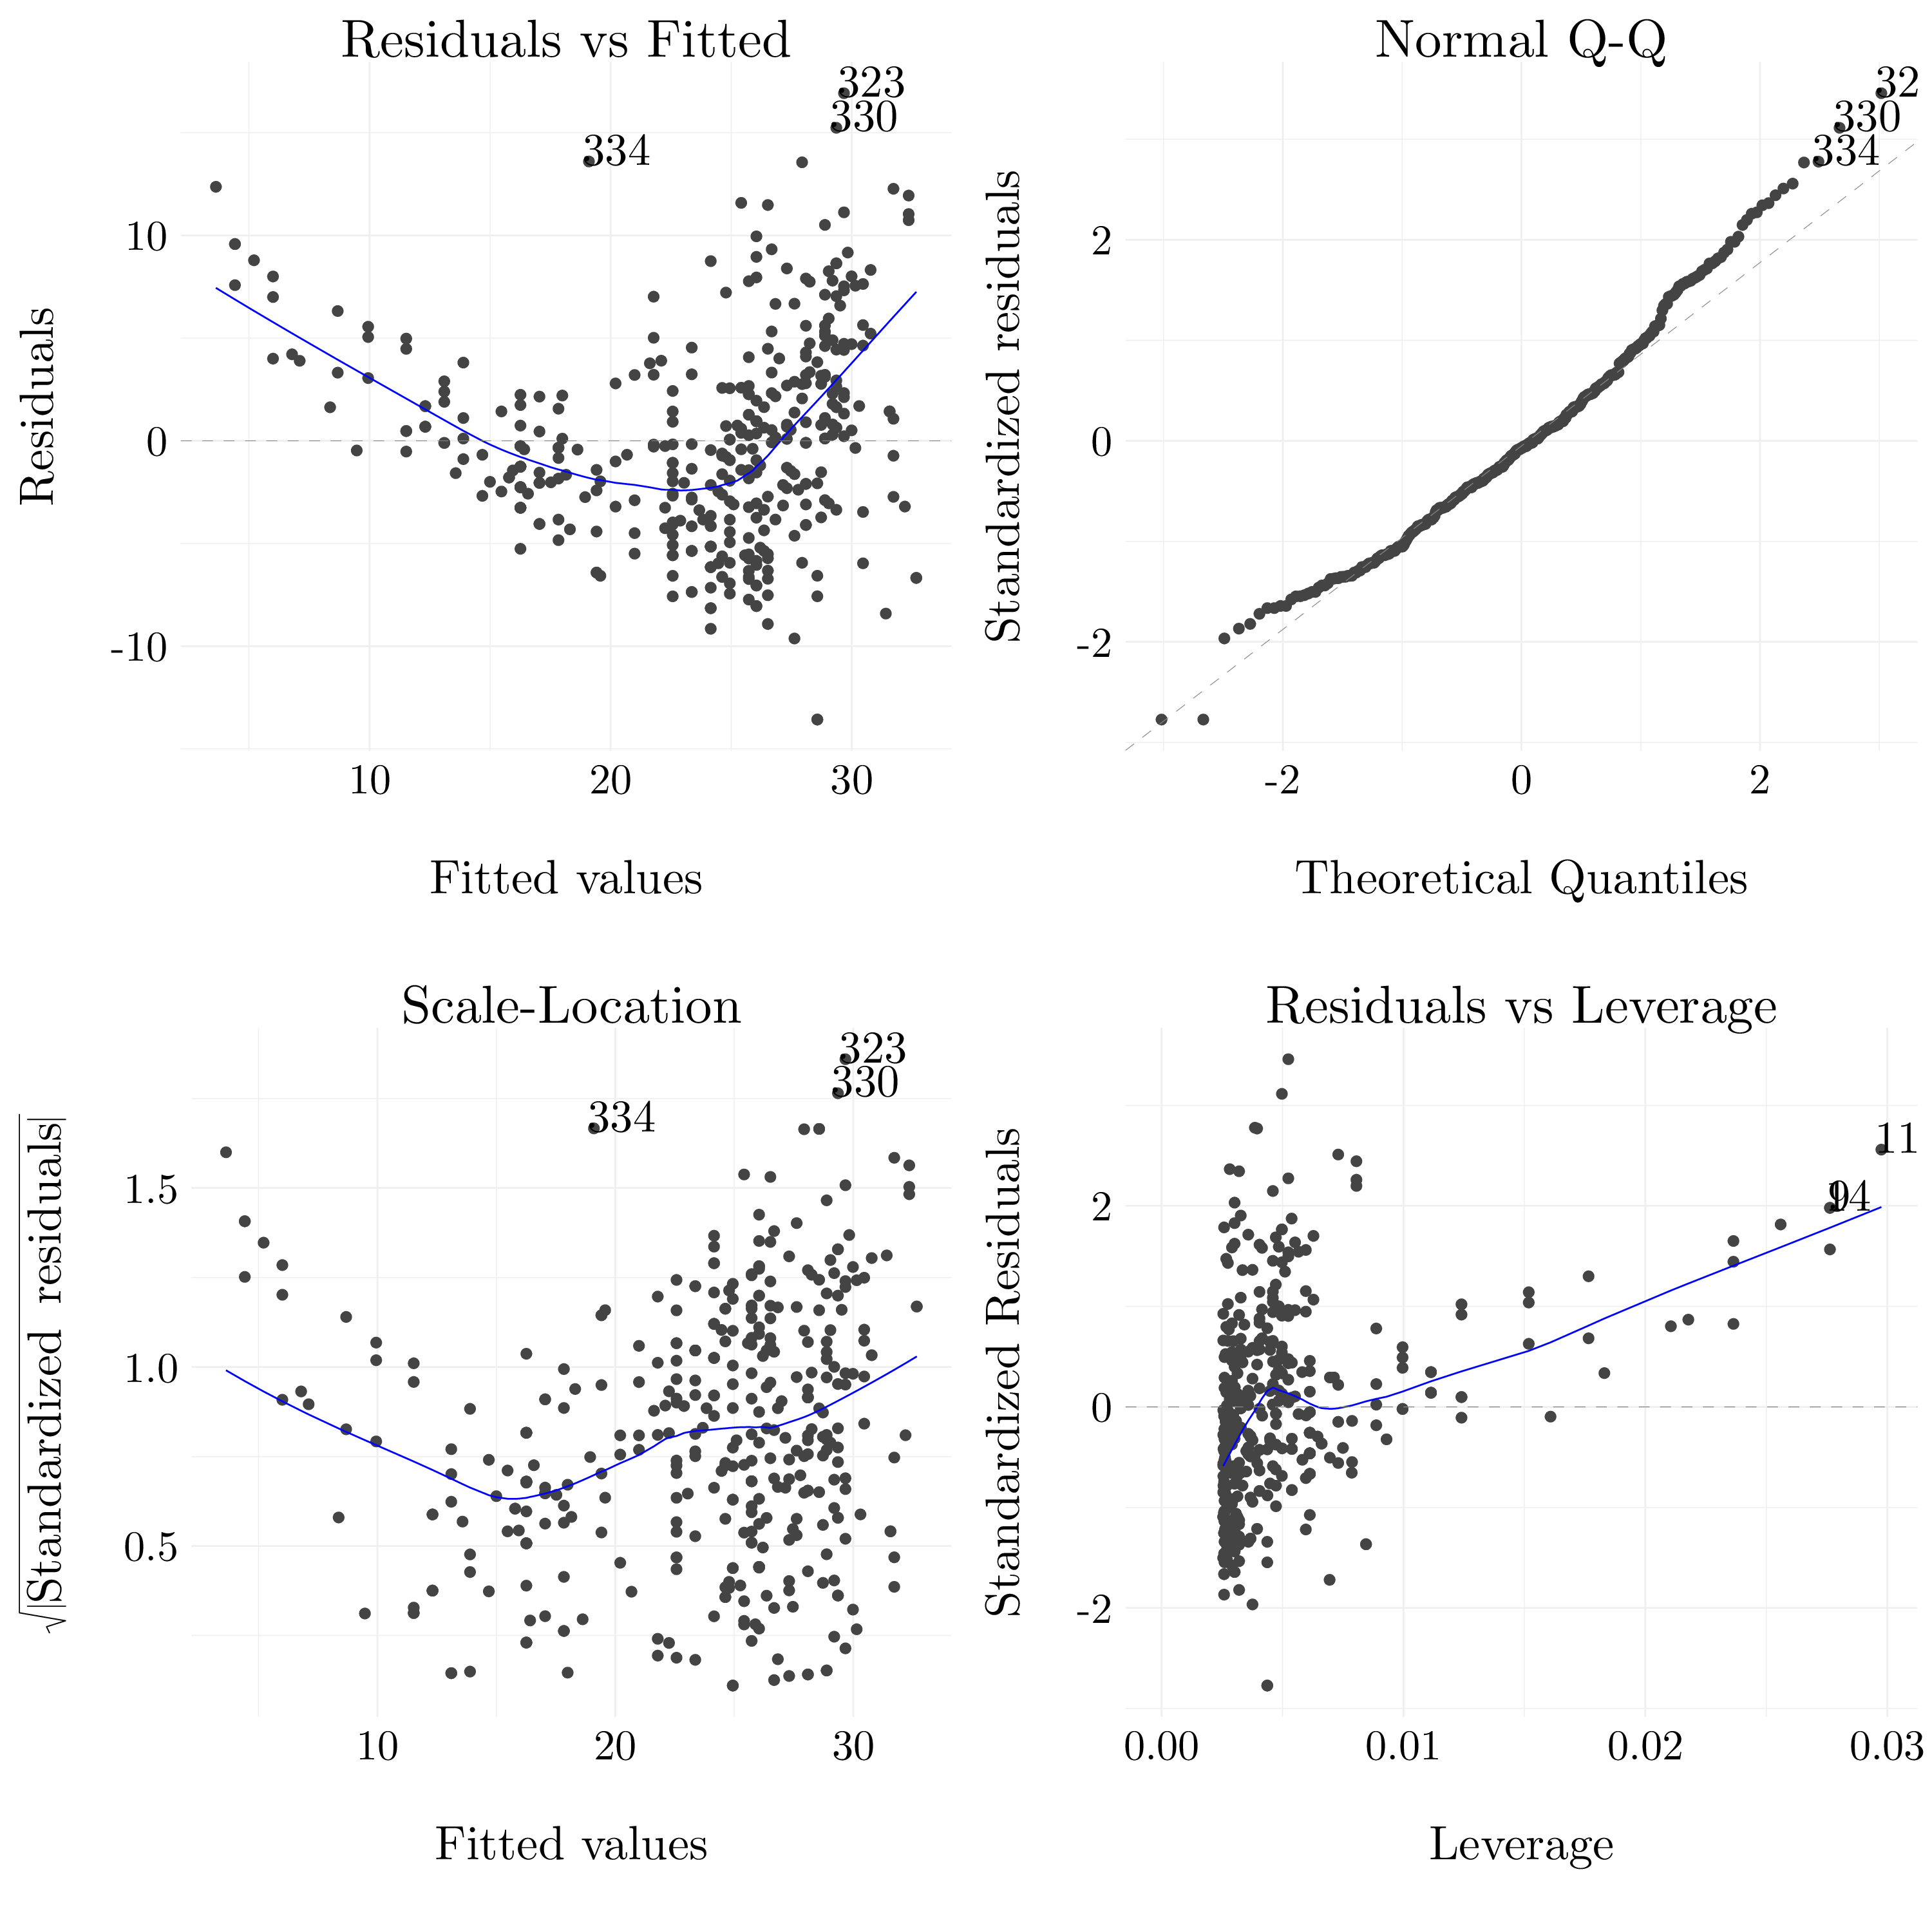 Diagnostic plots of the least square regression fit.